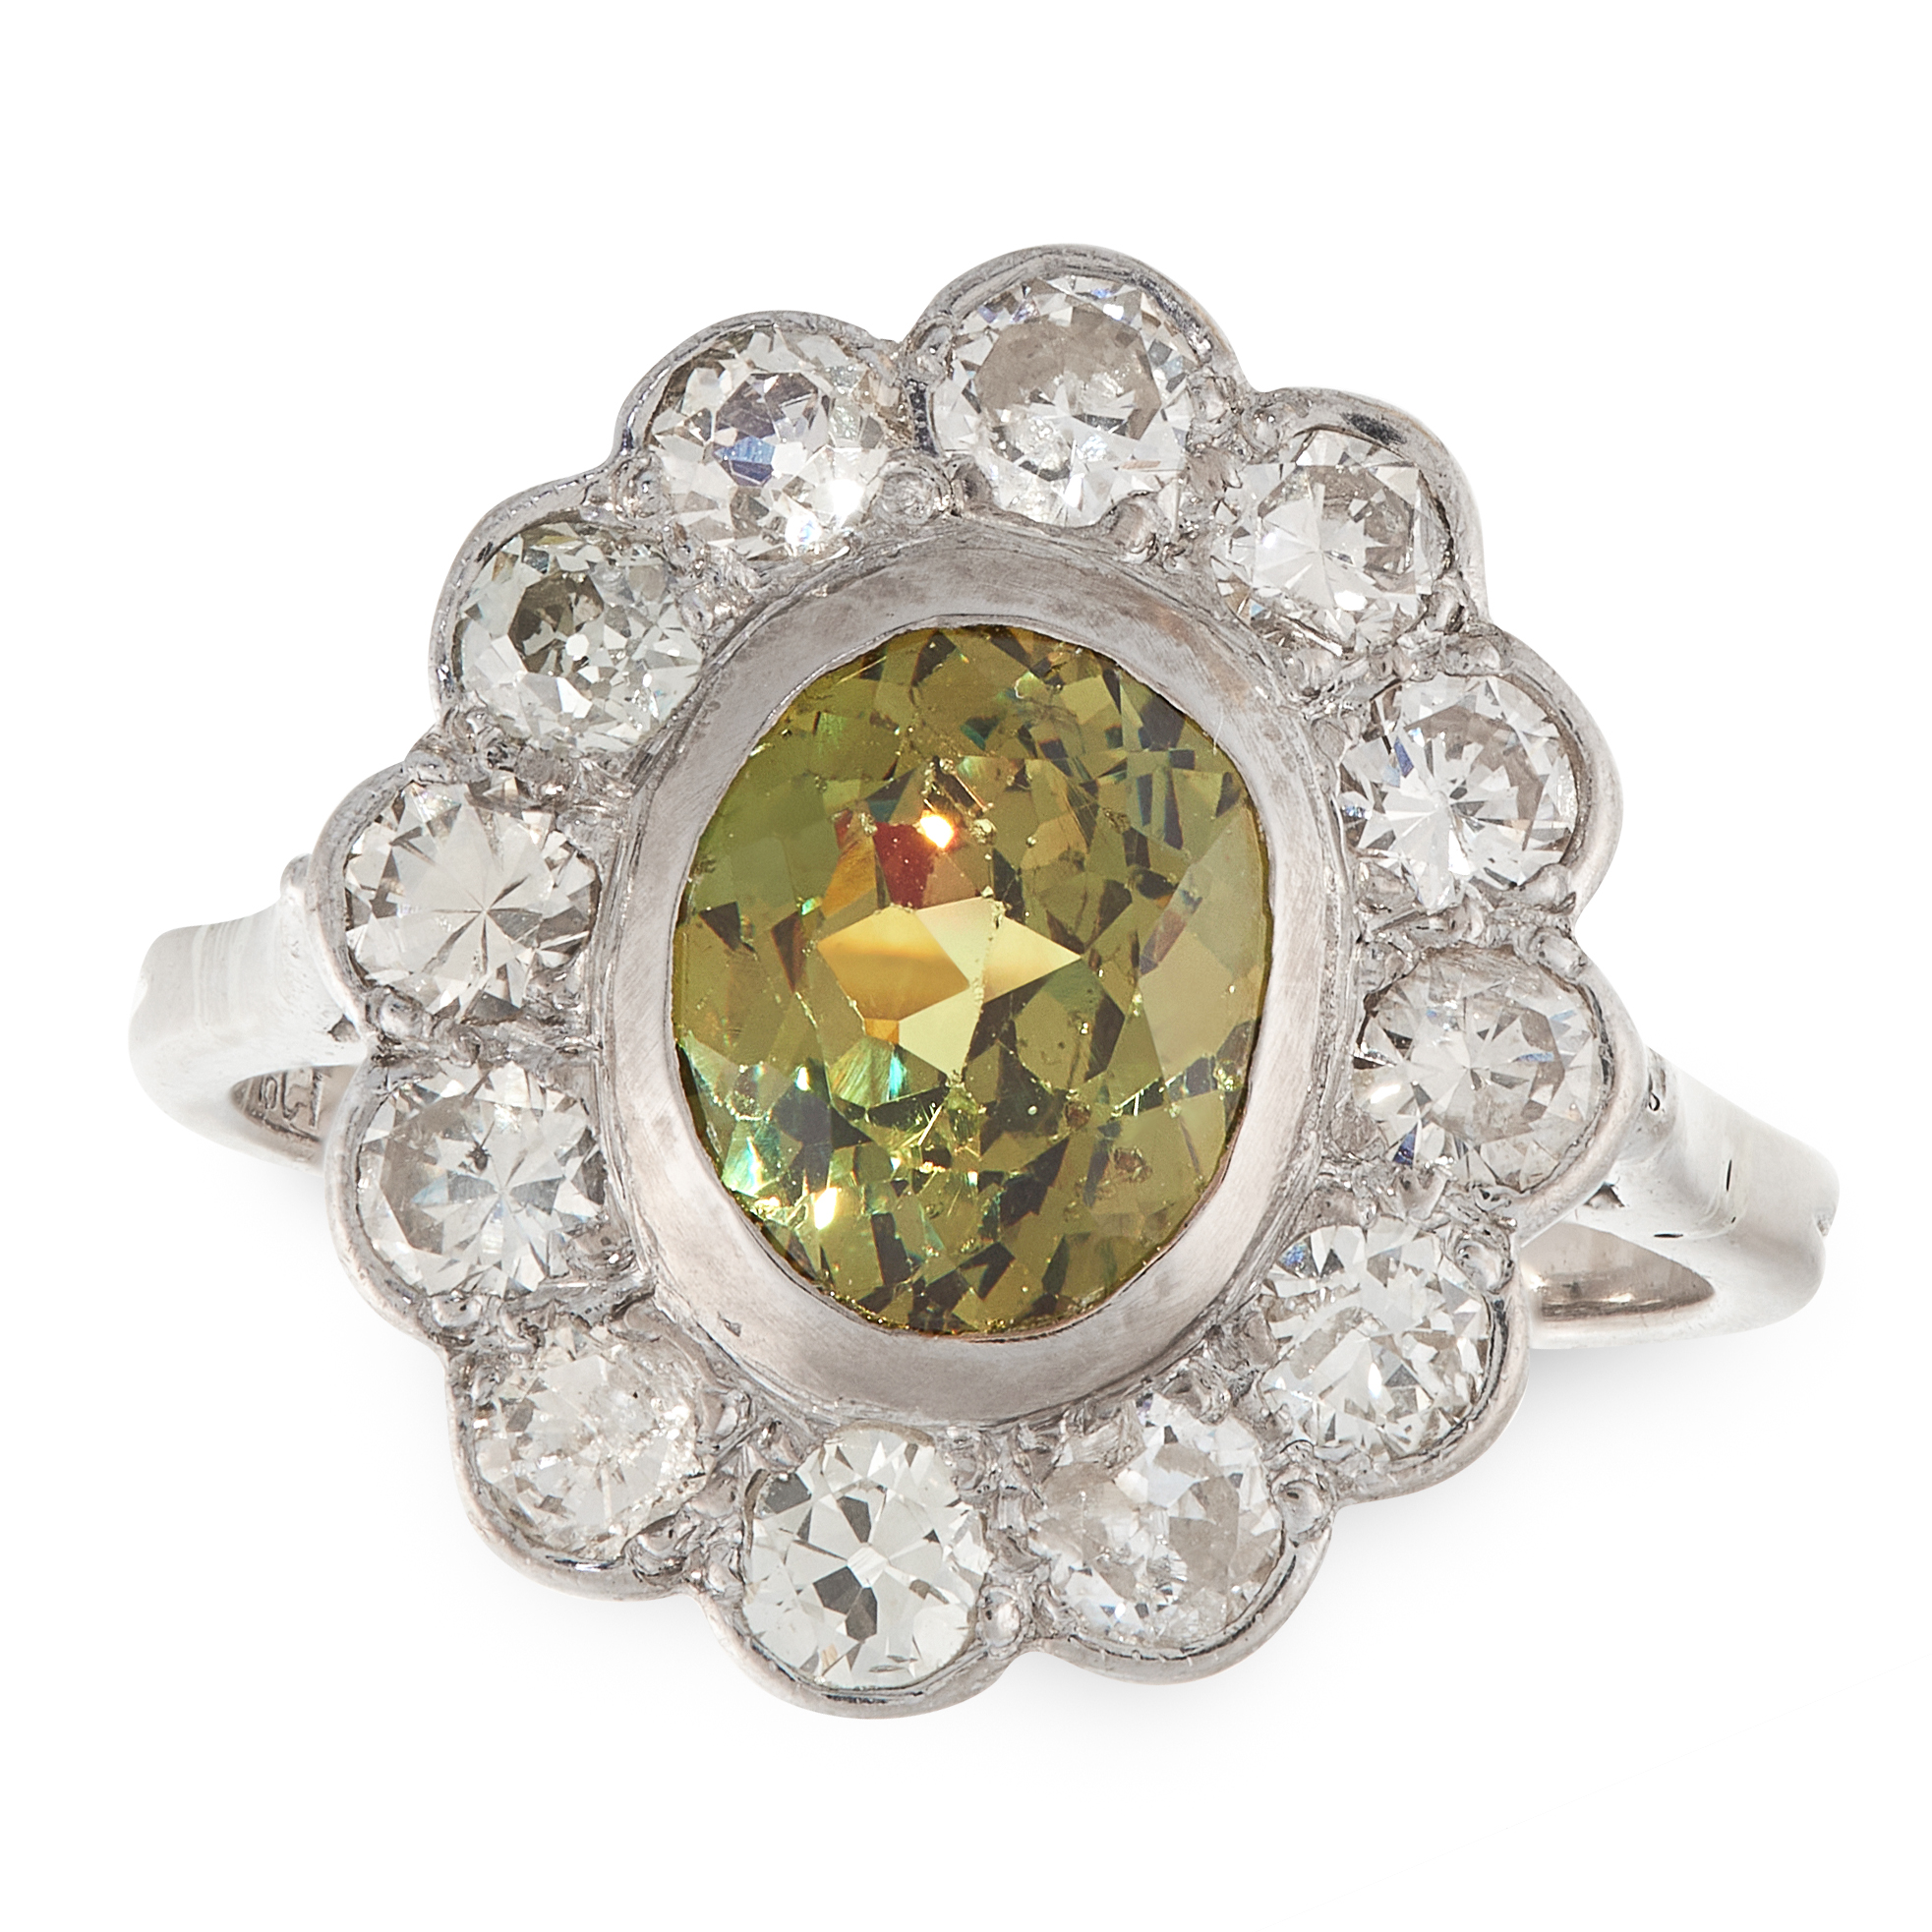 A DEMANTOID GARNET AND DIAMOND CLUSTER RING in 18ct yellow gold, set with an oval cut demantoid